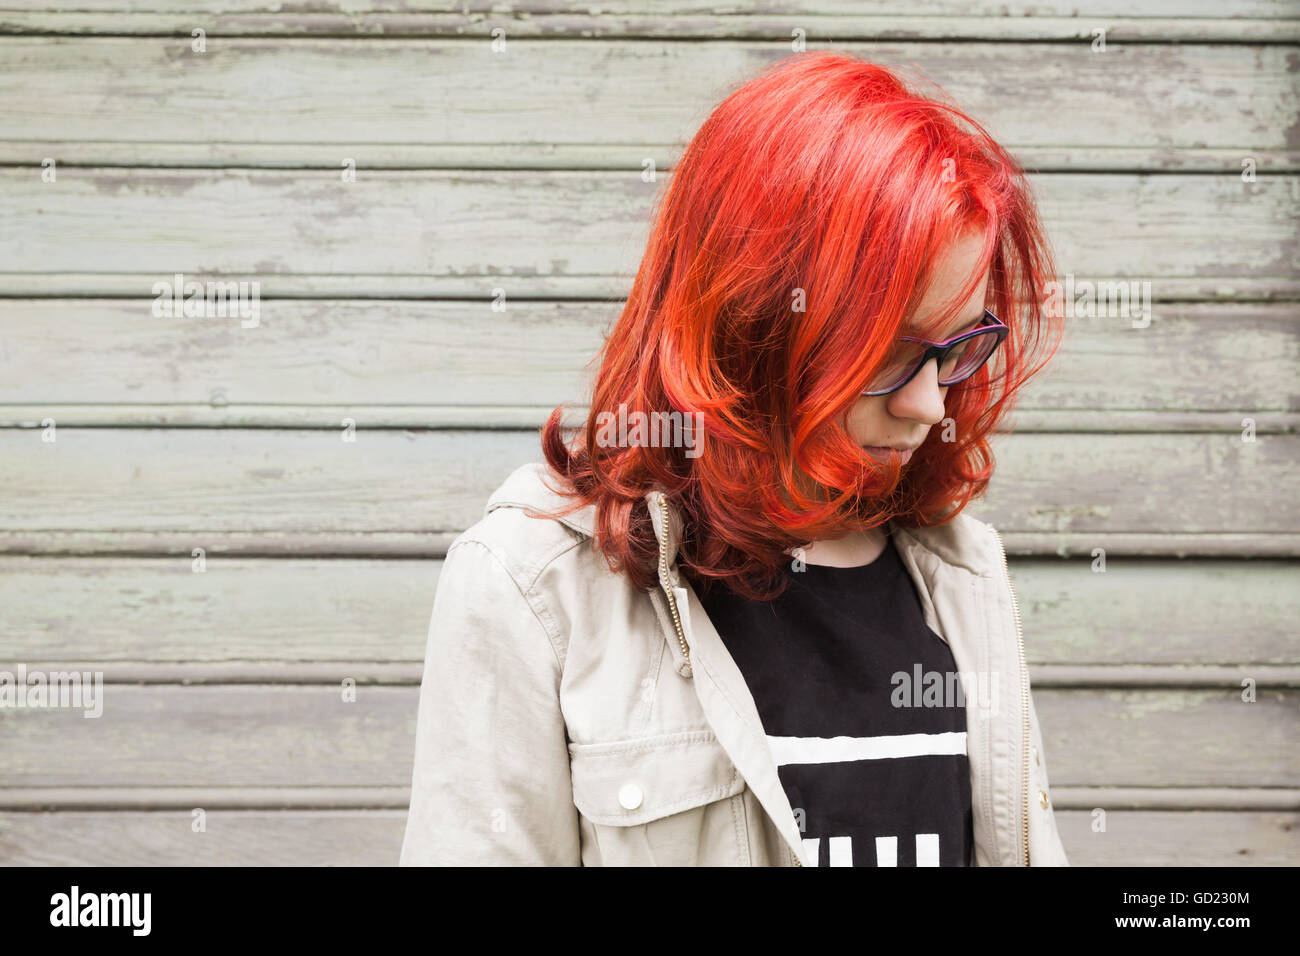 Sad Caucasian teenager girl in glasses with bright red hair, closeup outdoor portrait over green grungy wooden wall Stock Photo